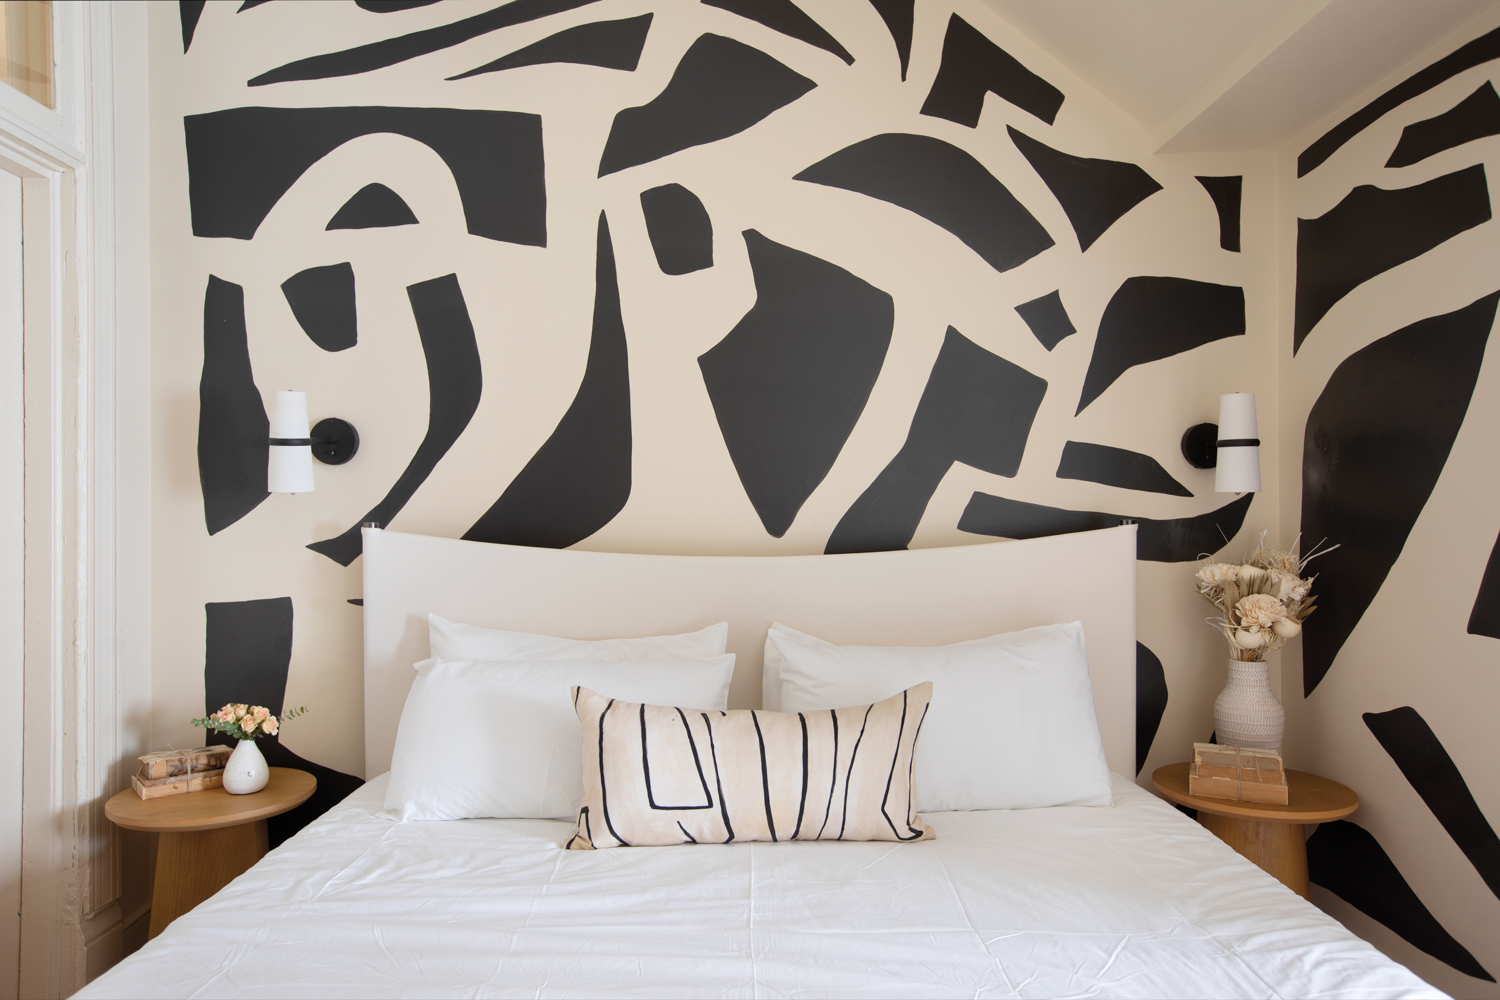 A black-and-white graphic mural by Magik Studios on the wall behind an all-white bed